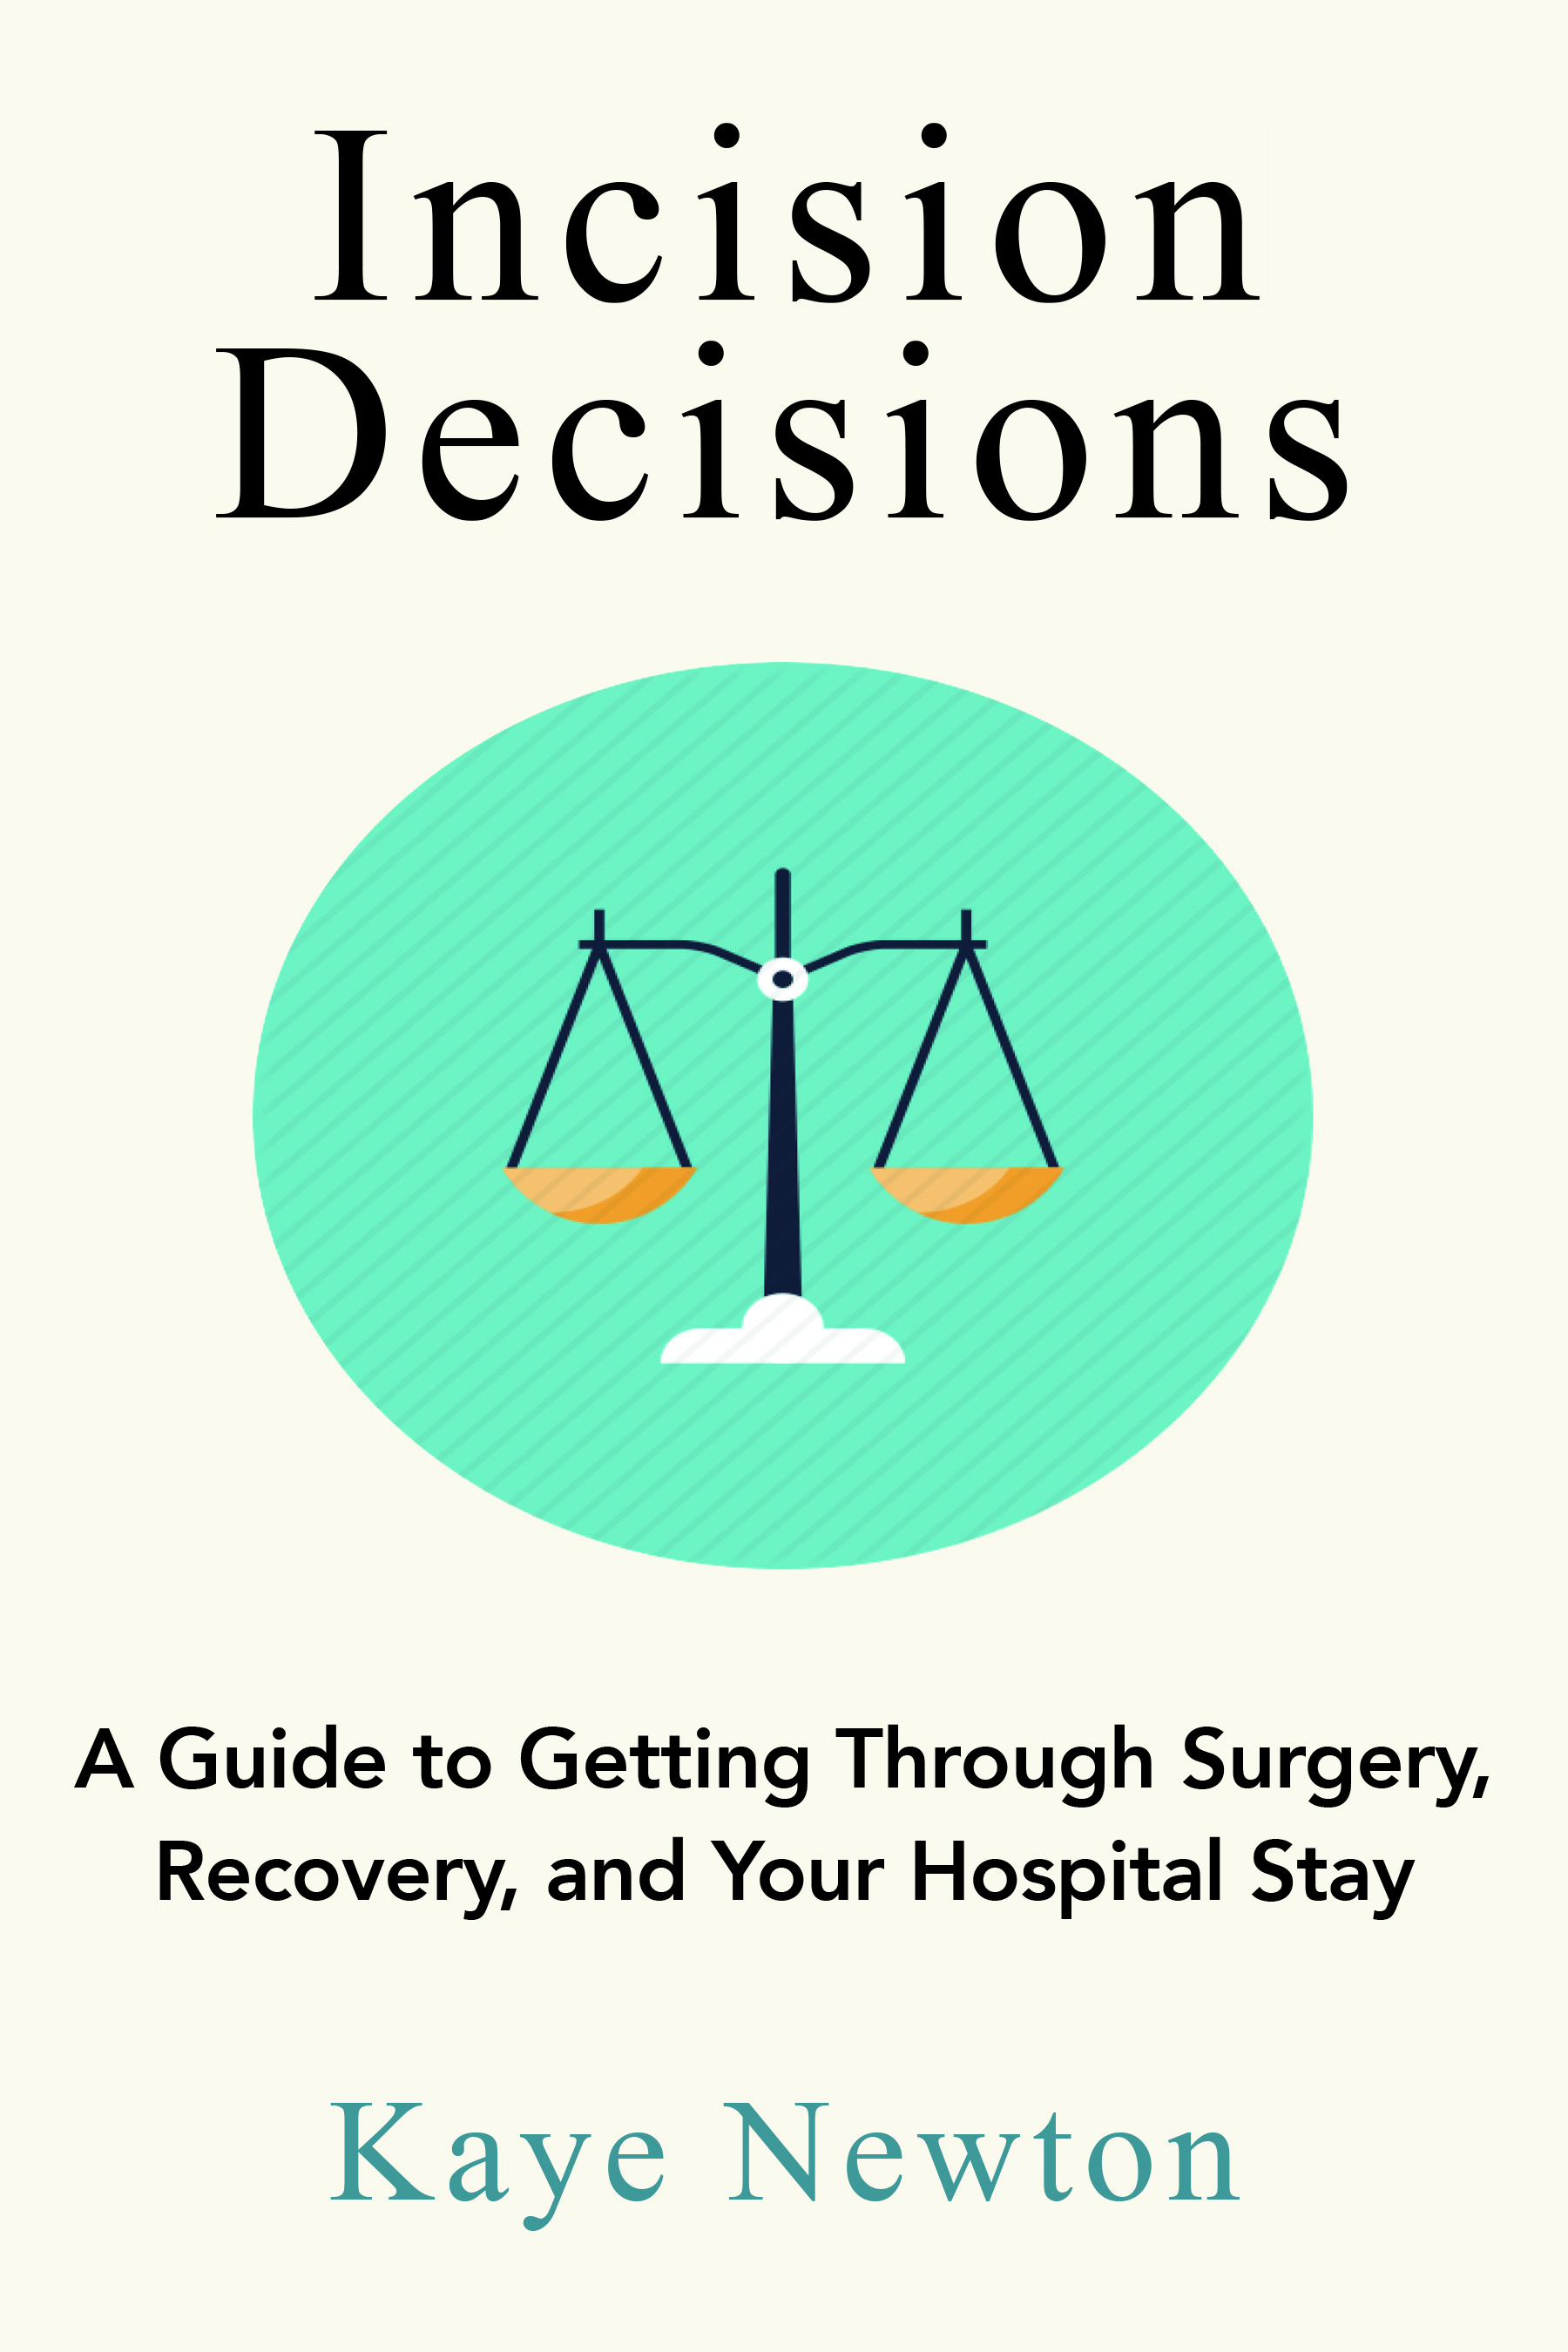 Incision Decisions: A Guide to Getting Through Surgery, Recovery, and Your Hospital Stay